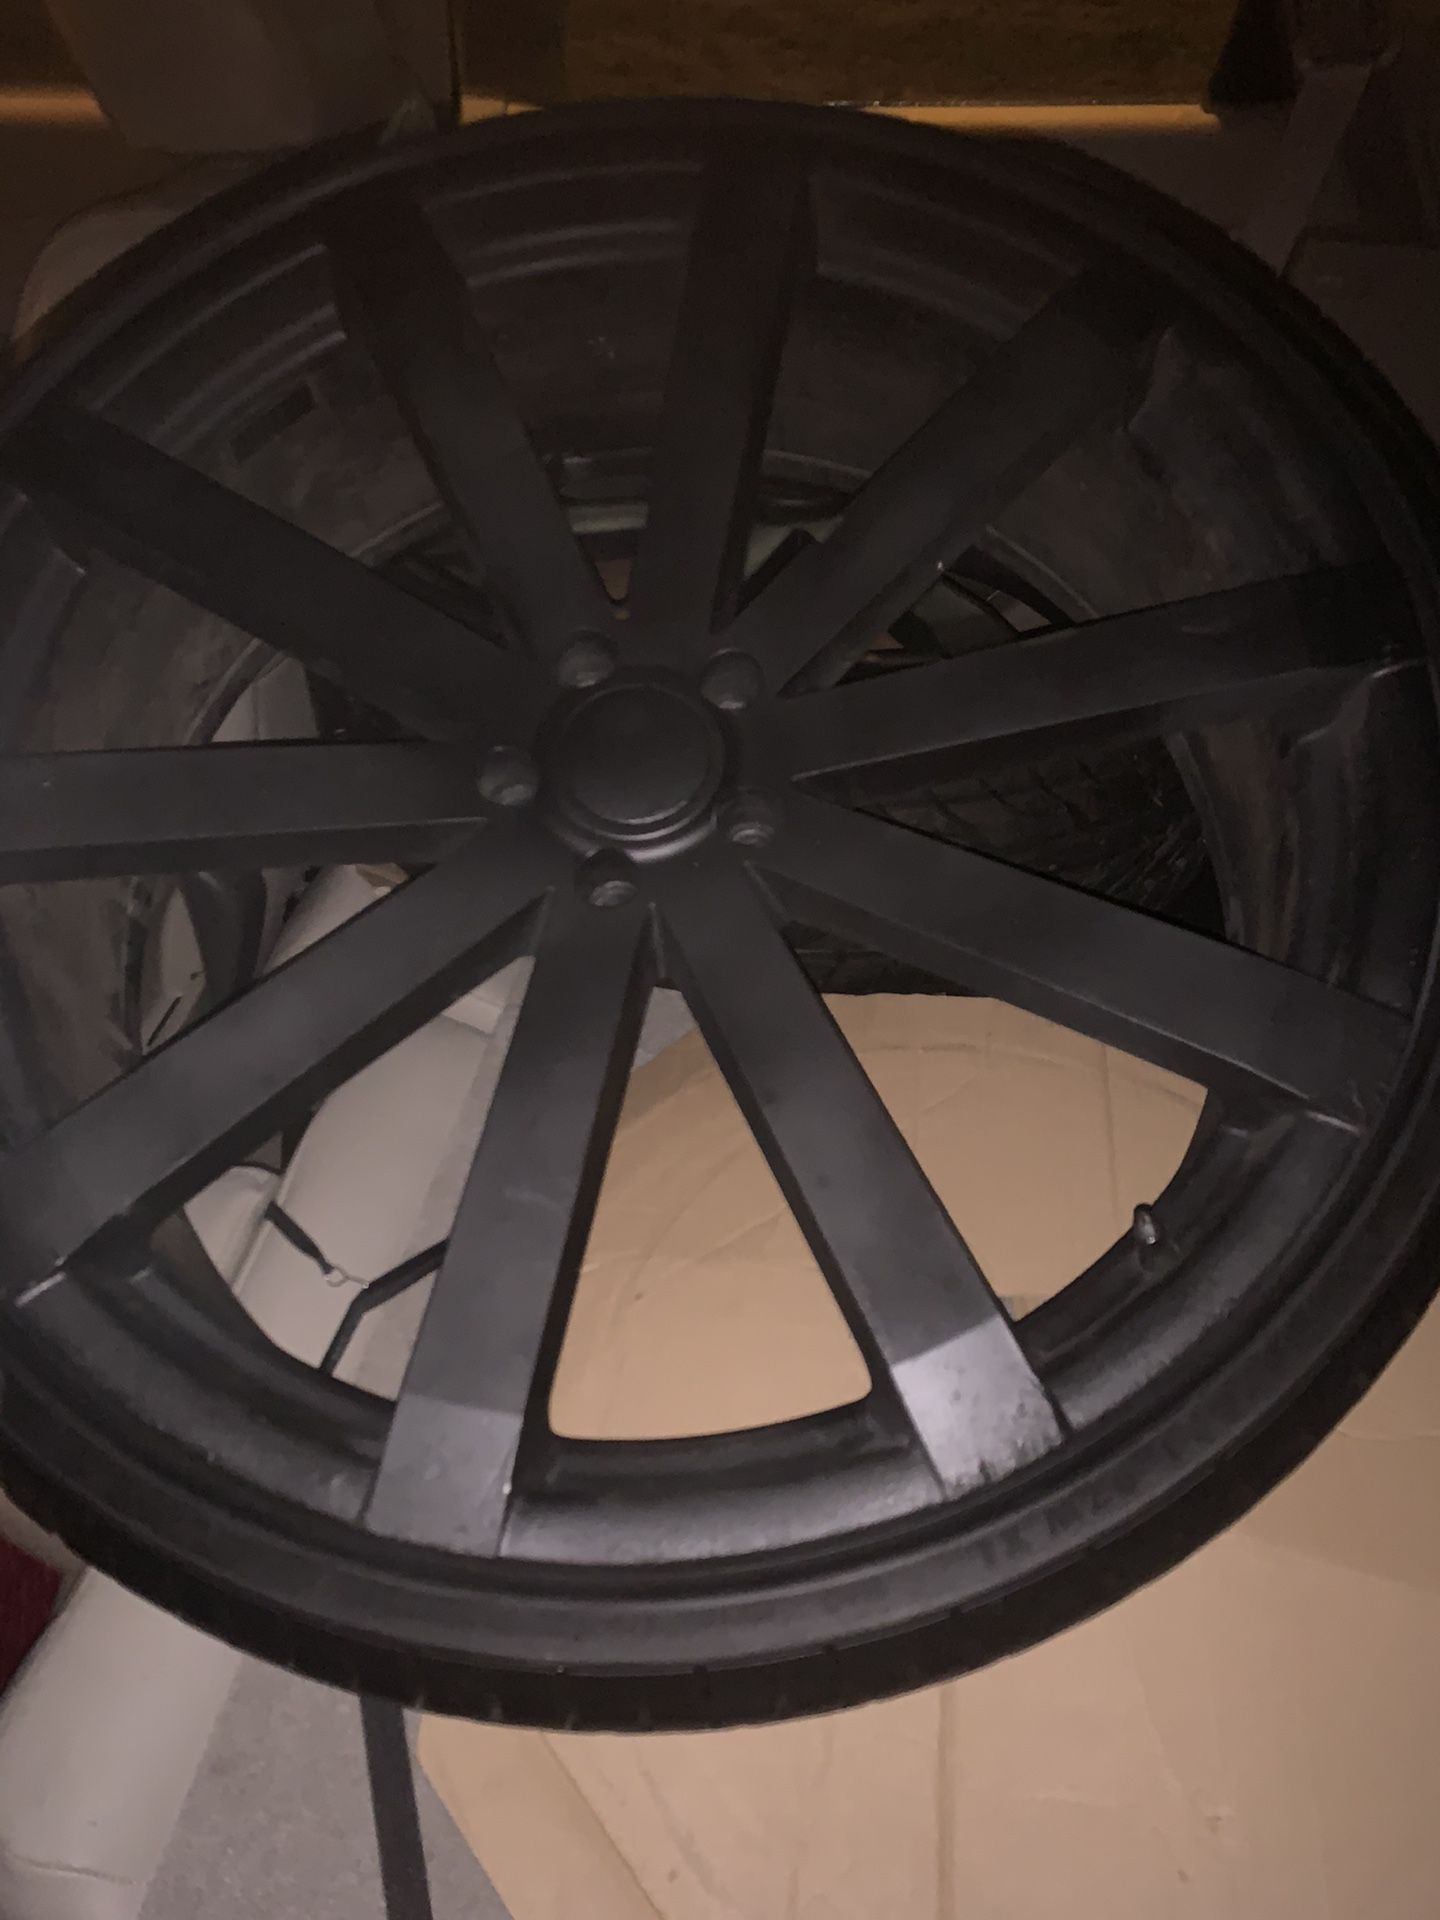 24s elure rims 255/30/24 come get them I don’t want them any more